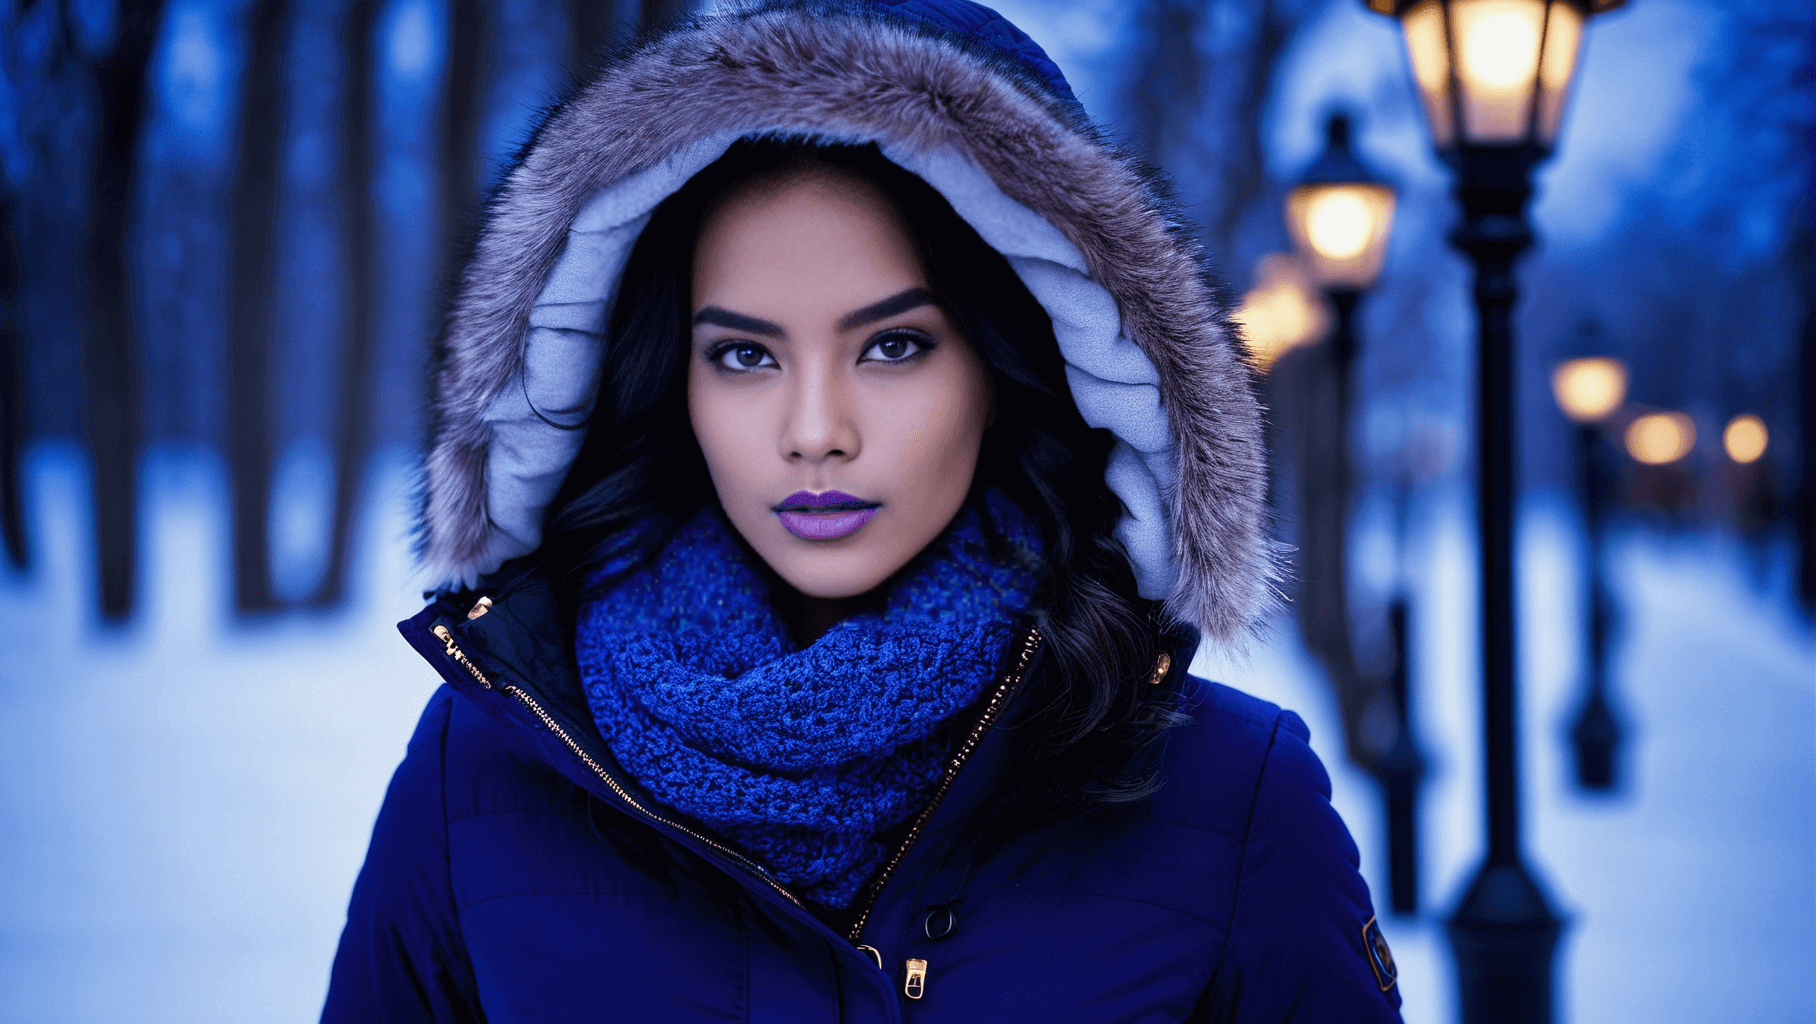 Woman in blue winter jacket and fur-lined hood under evening streetlights.